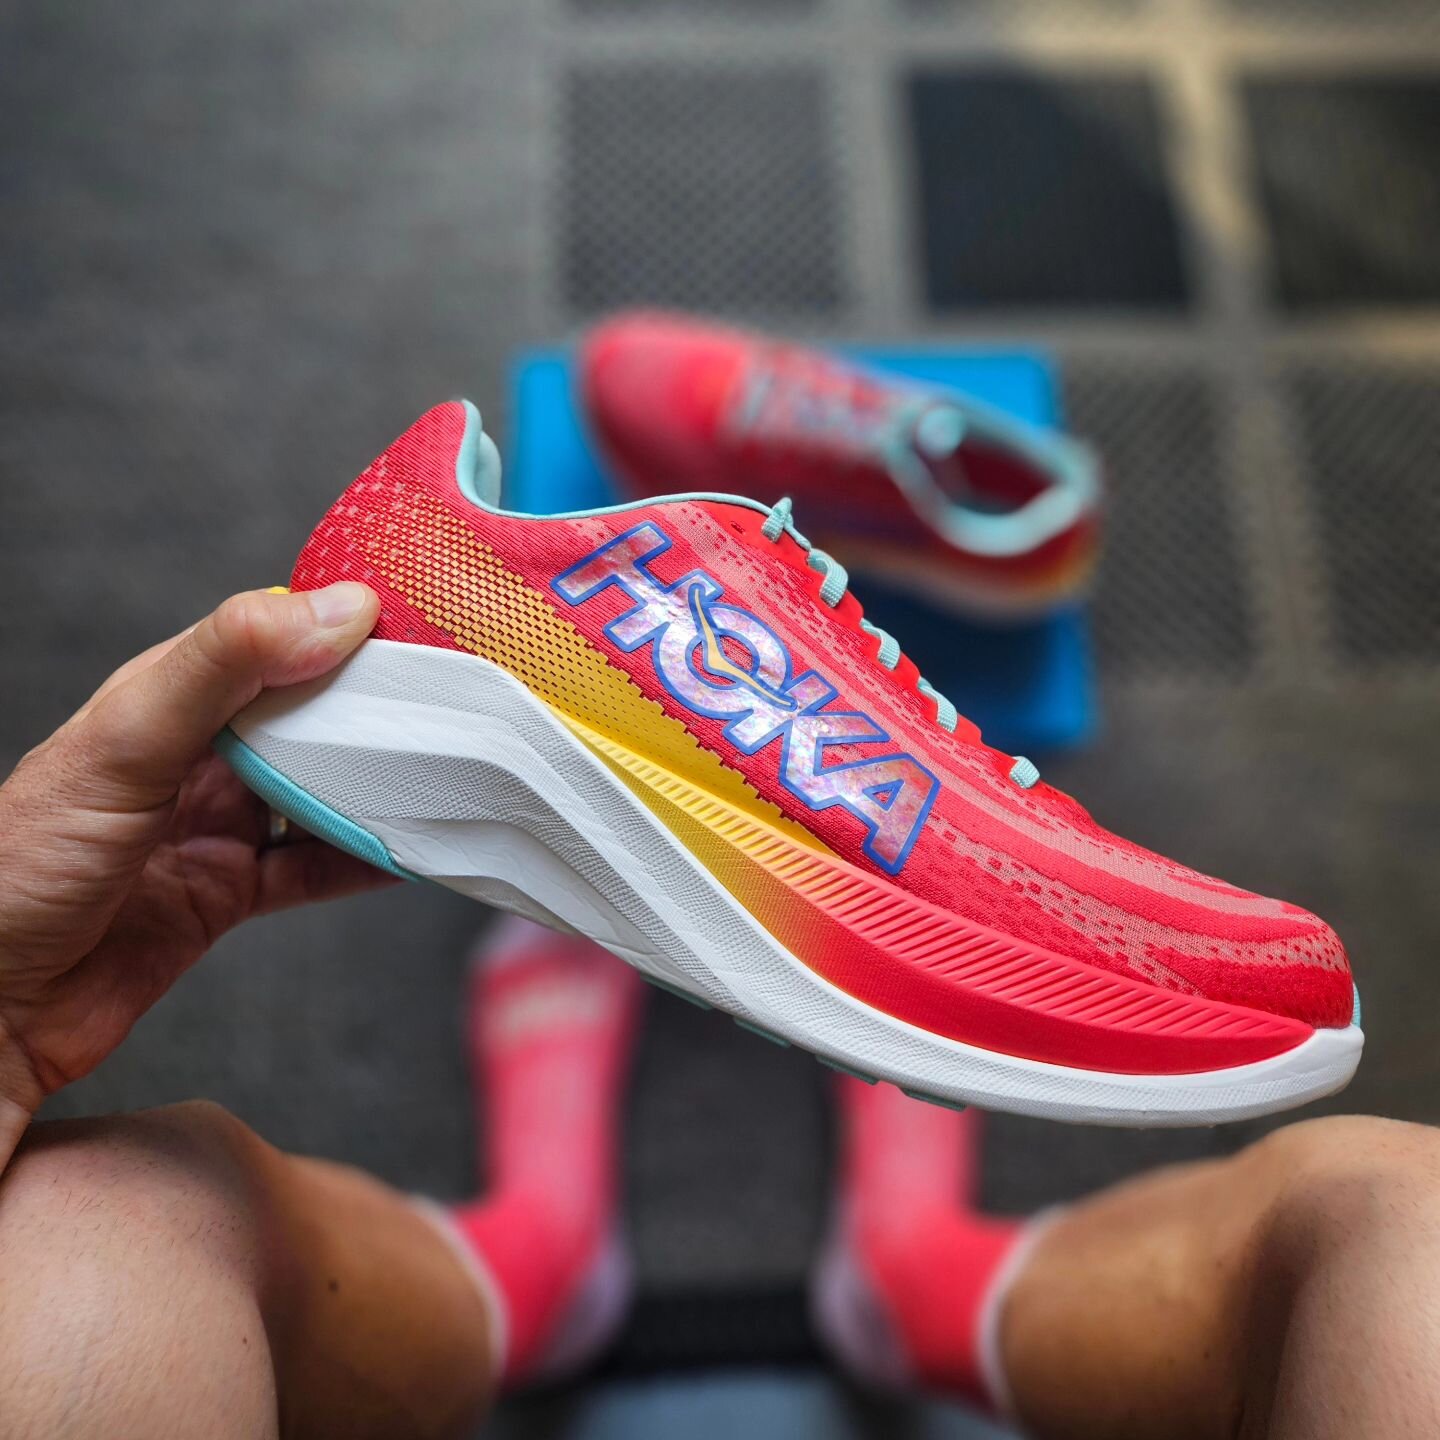 New Kicks // to kick-start some new training ❤️🧡🩵 @hoka_au

A fresh pair of #MachX to reenergise my running as I work to shake this lingering hamstring issue. One of my favourite and most versatile shoes in the rotation. 

Kicked off the week with 